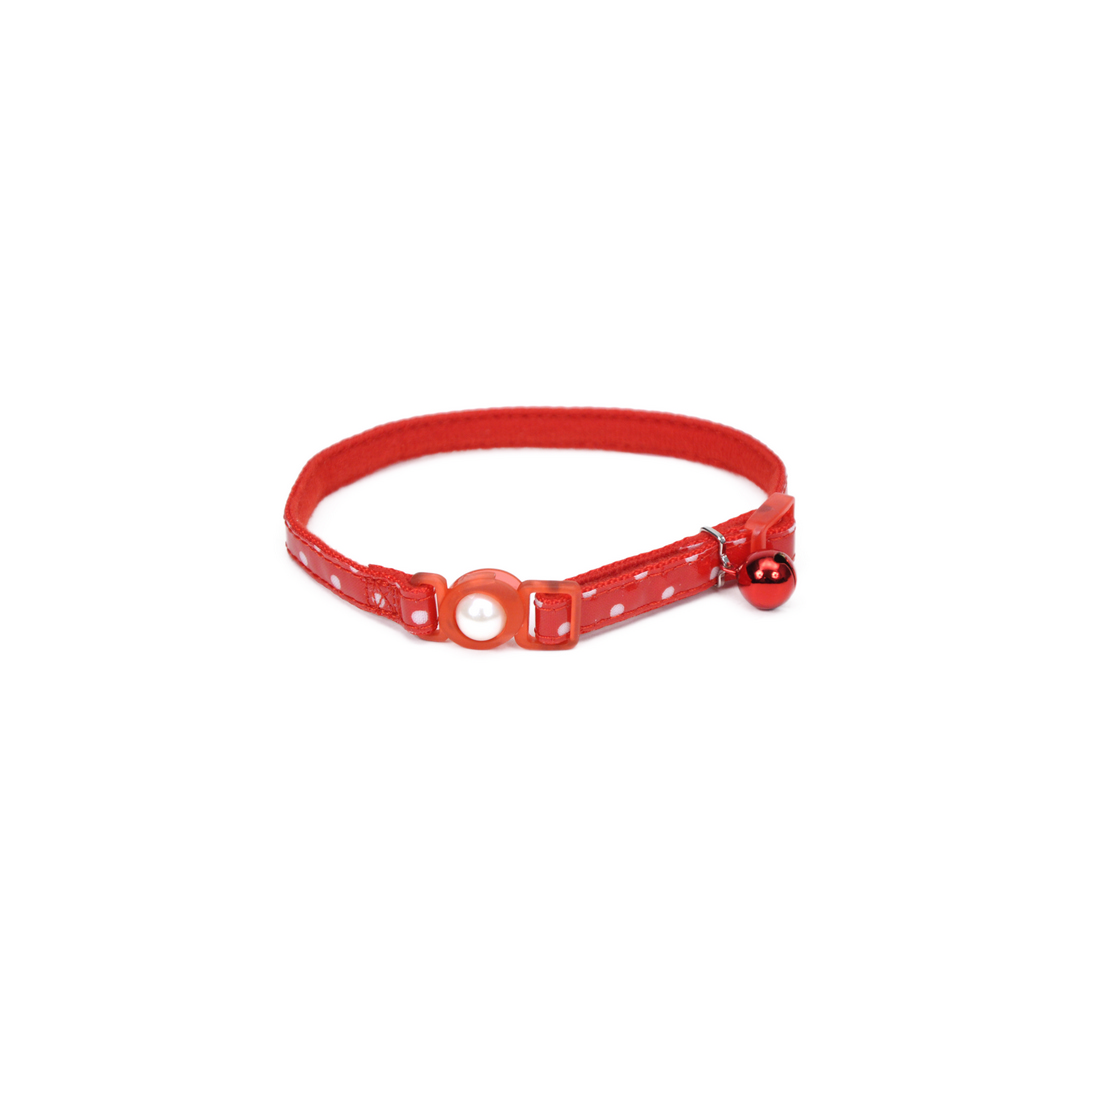 Coastal 3 and Safe Cat Fashion Collar with Polka Dot Overlay Red